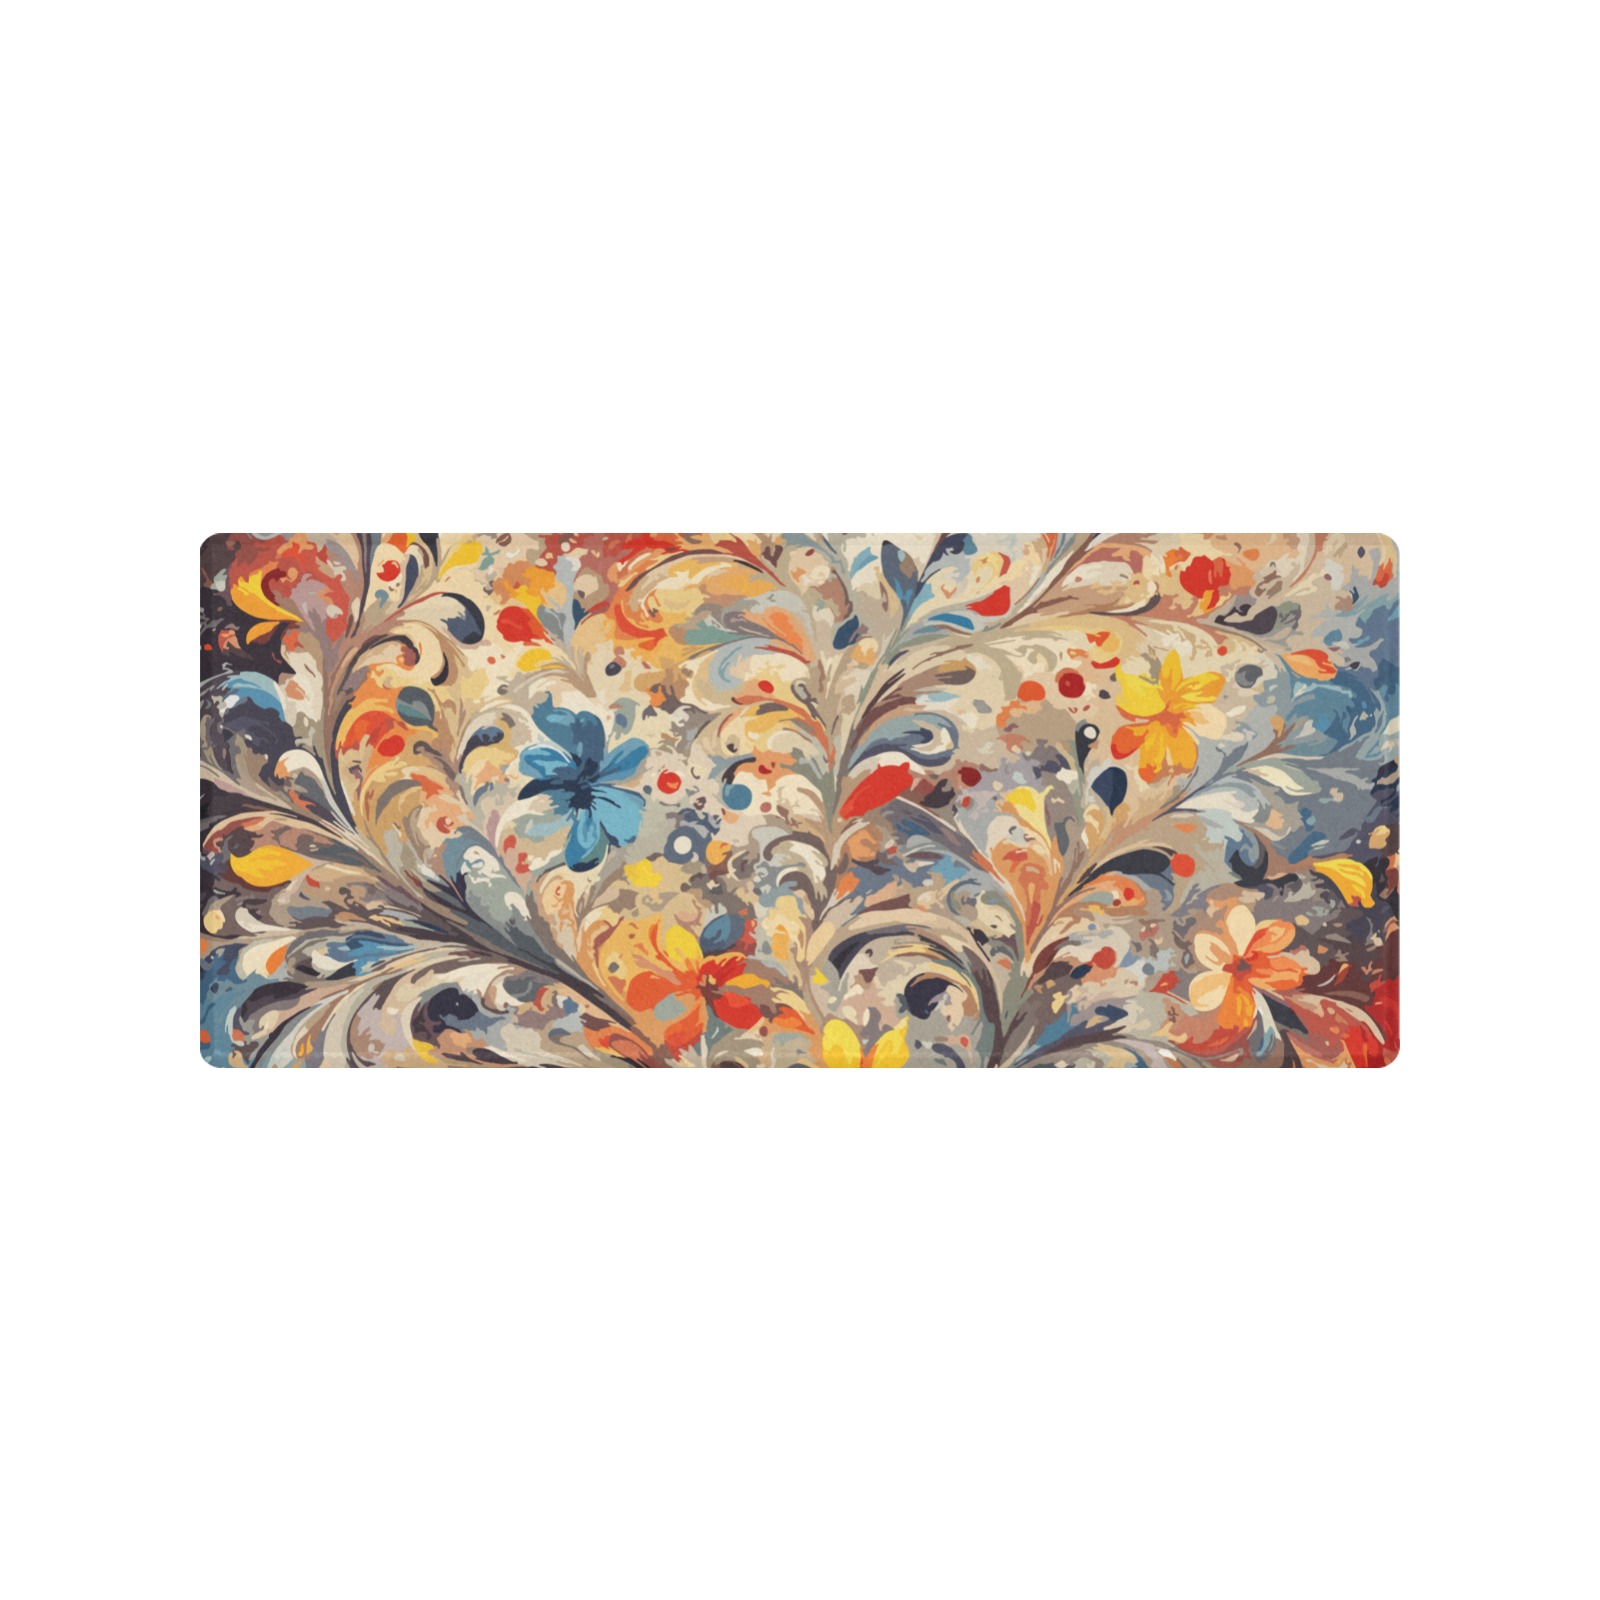 Stunning floral pattern. Fantasy plants, flowers Gaming Mousepad (35"x16")